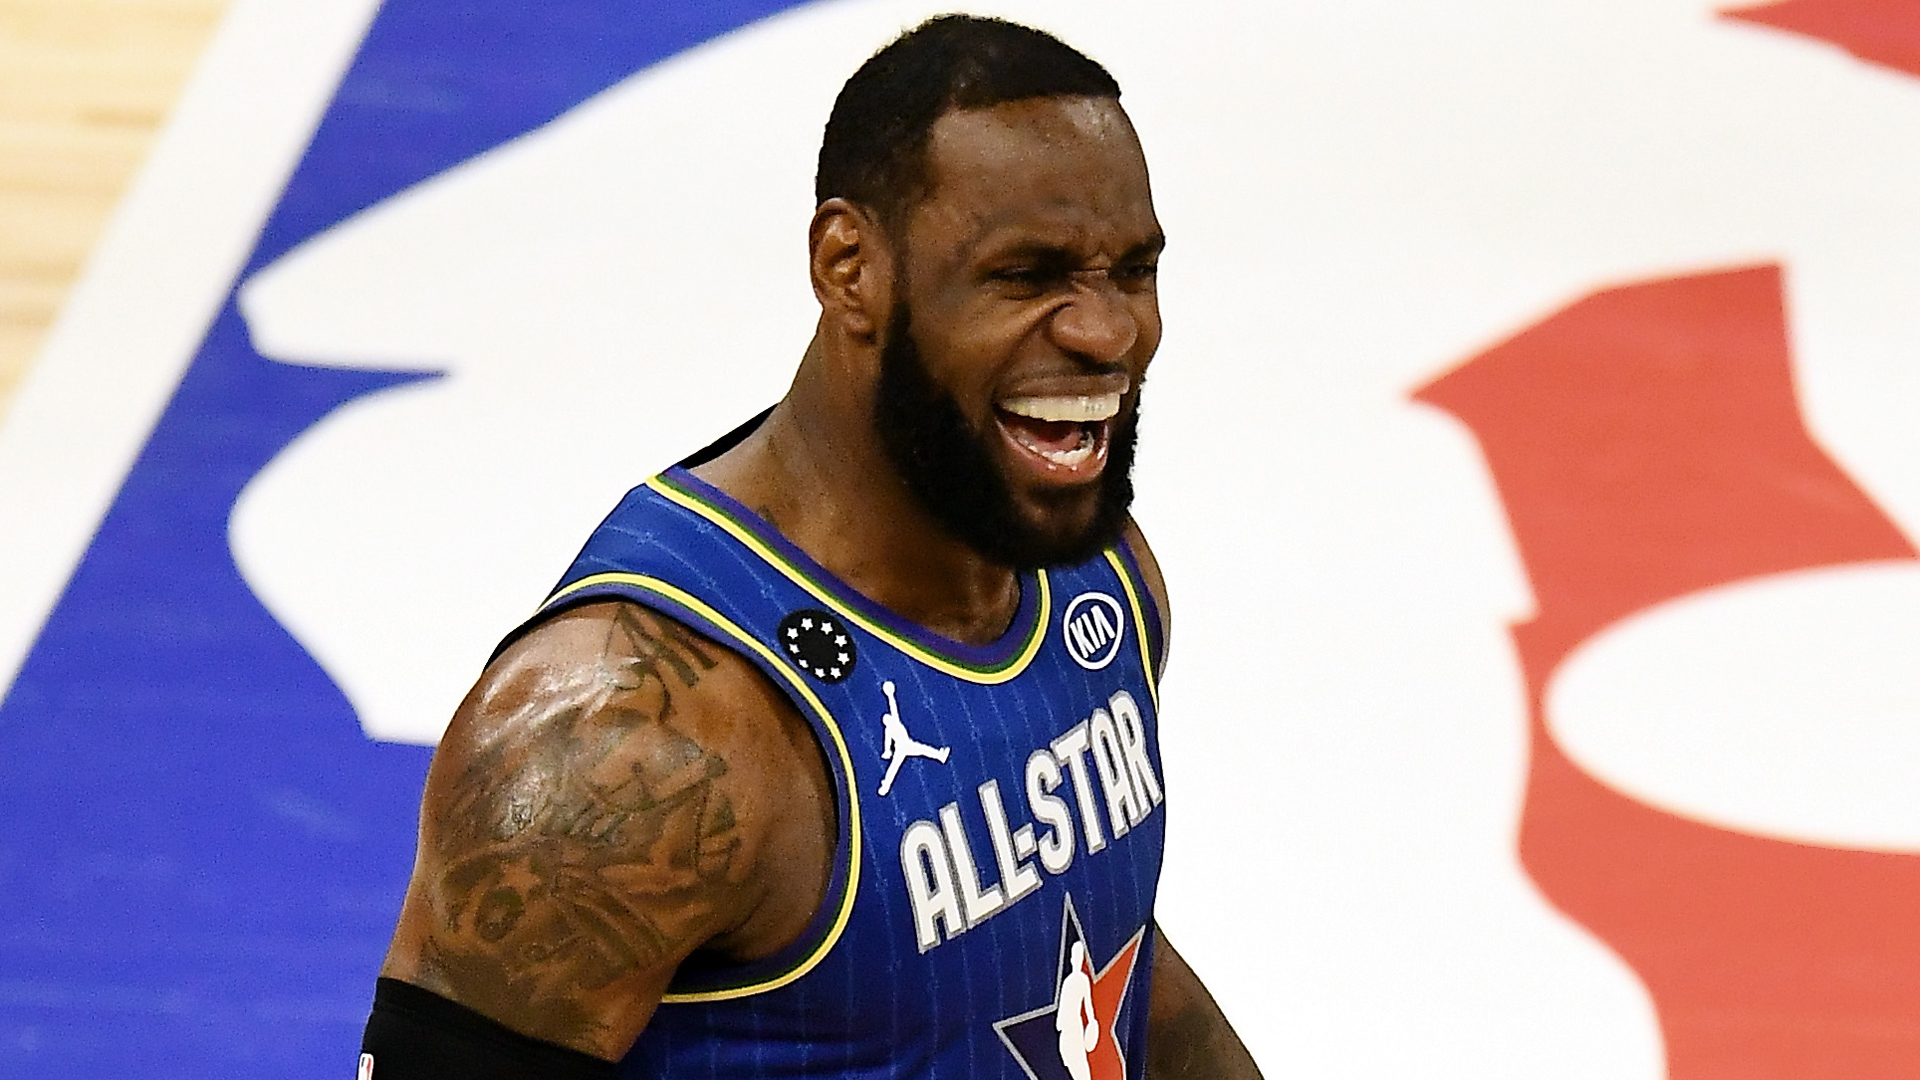 Kobe Bryant's presence was felt by LeBron James during Sunday's NBA All-Star Game.